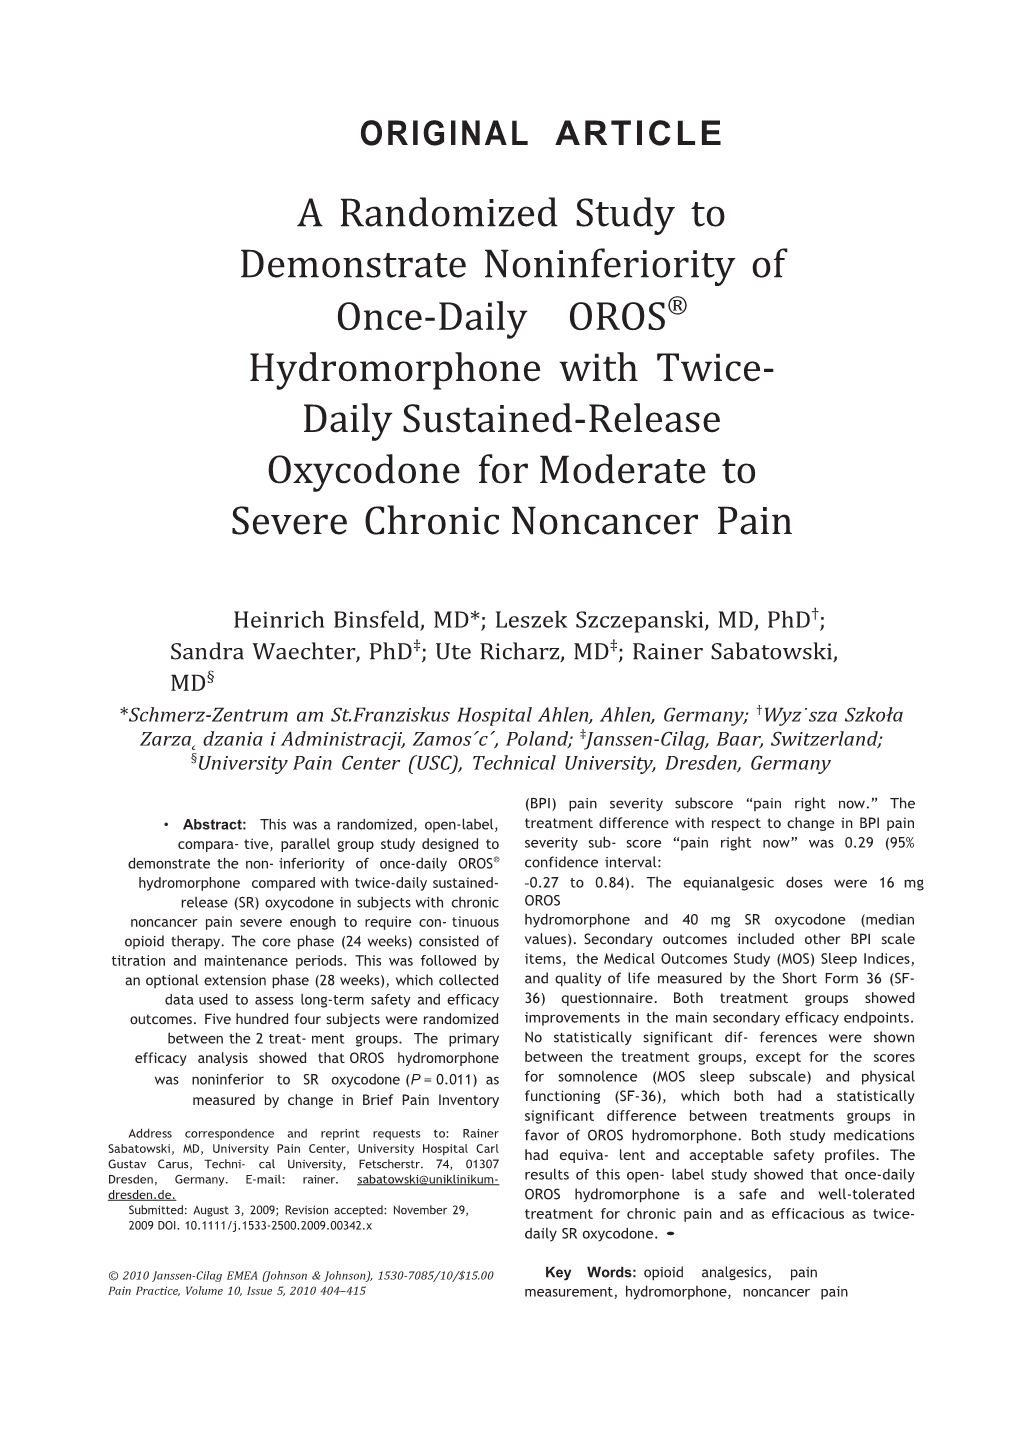 A Randomized Study to Demonstrate Noninferiority of Oncedaily OROS Hydromorphone with Twicedaily